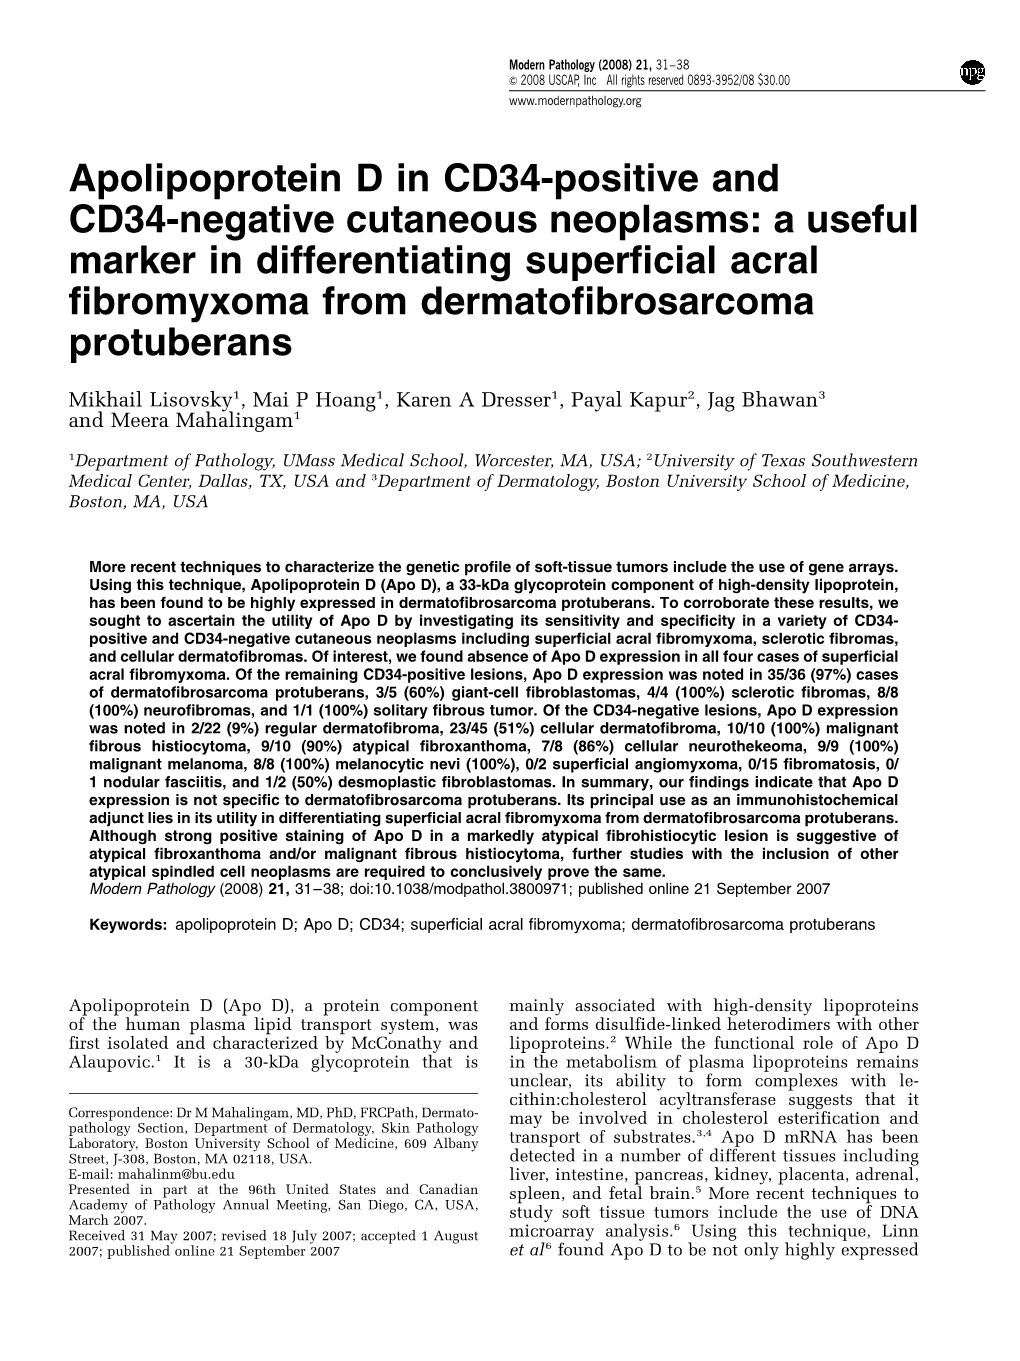 Apolipoprotein D in CD34-Positive and CD34-Negative